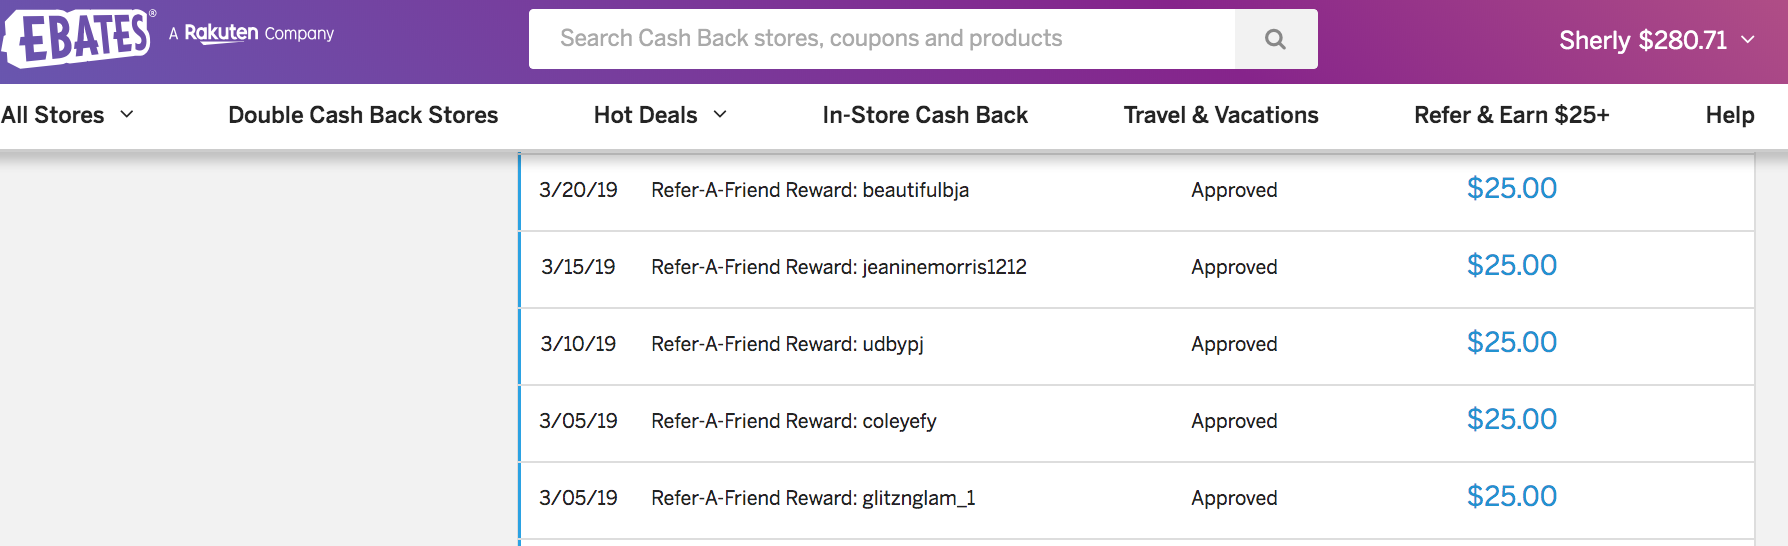 Ebates For March